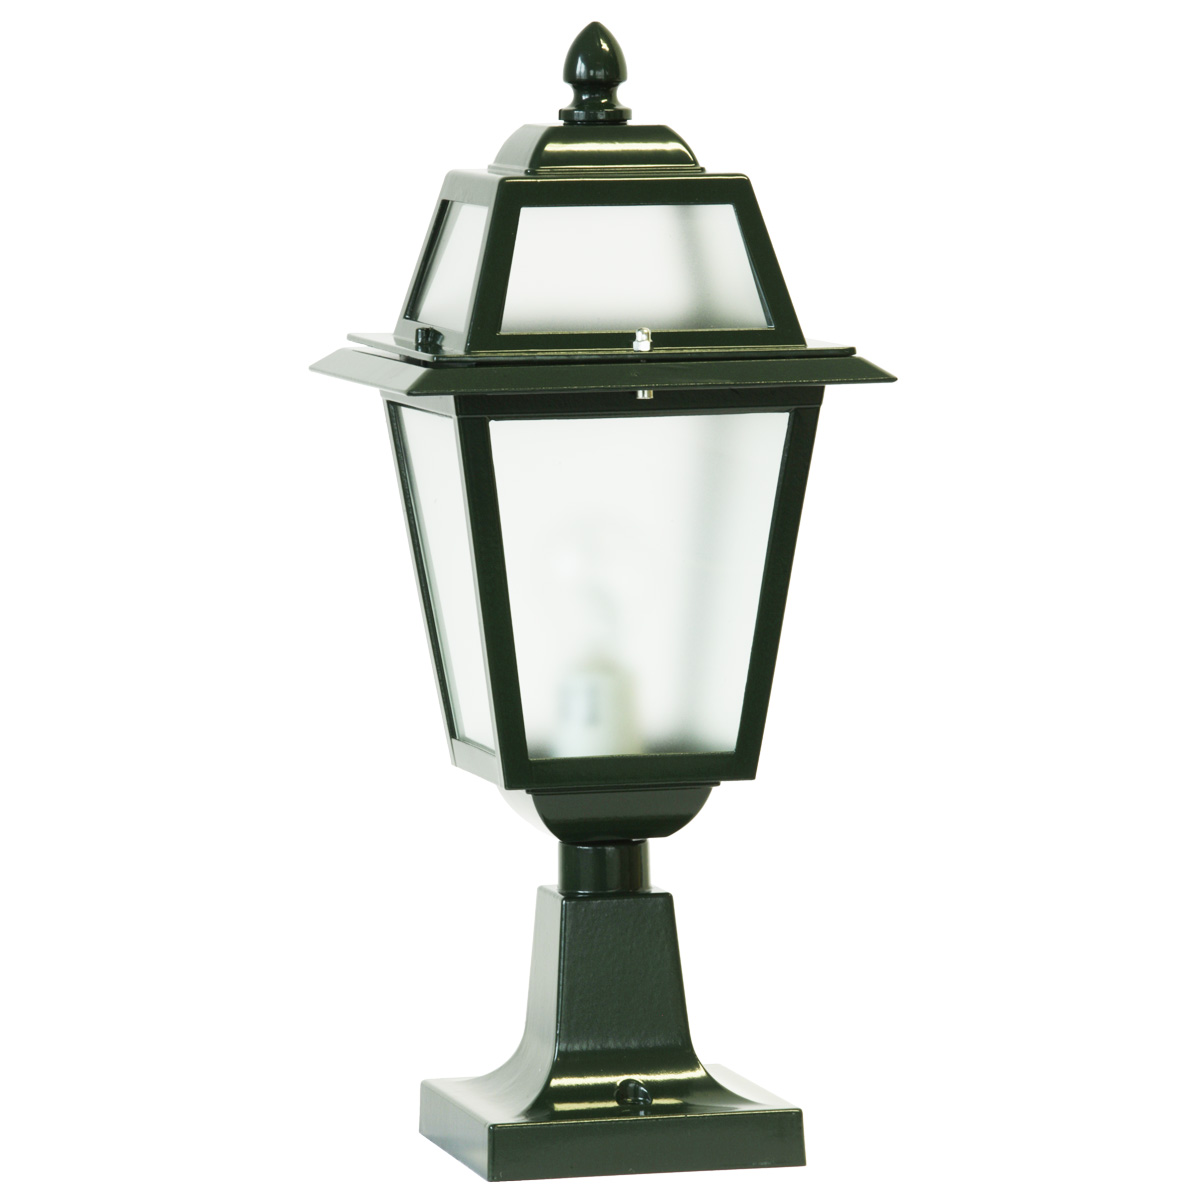 Pedestal Lamp for Outdoors in Ten Different Colors